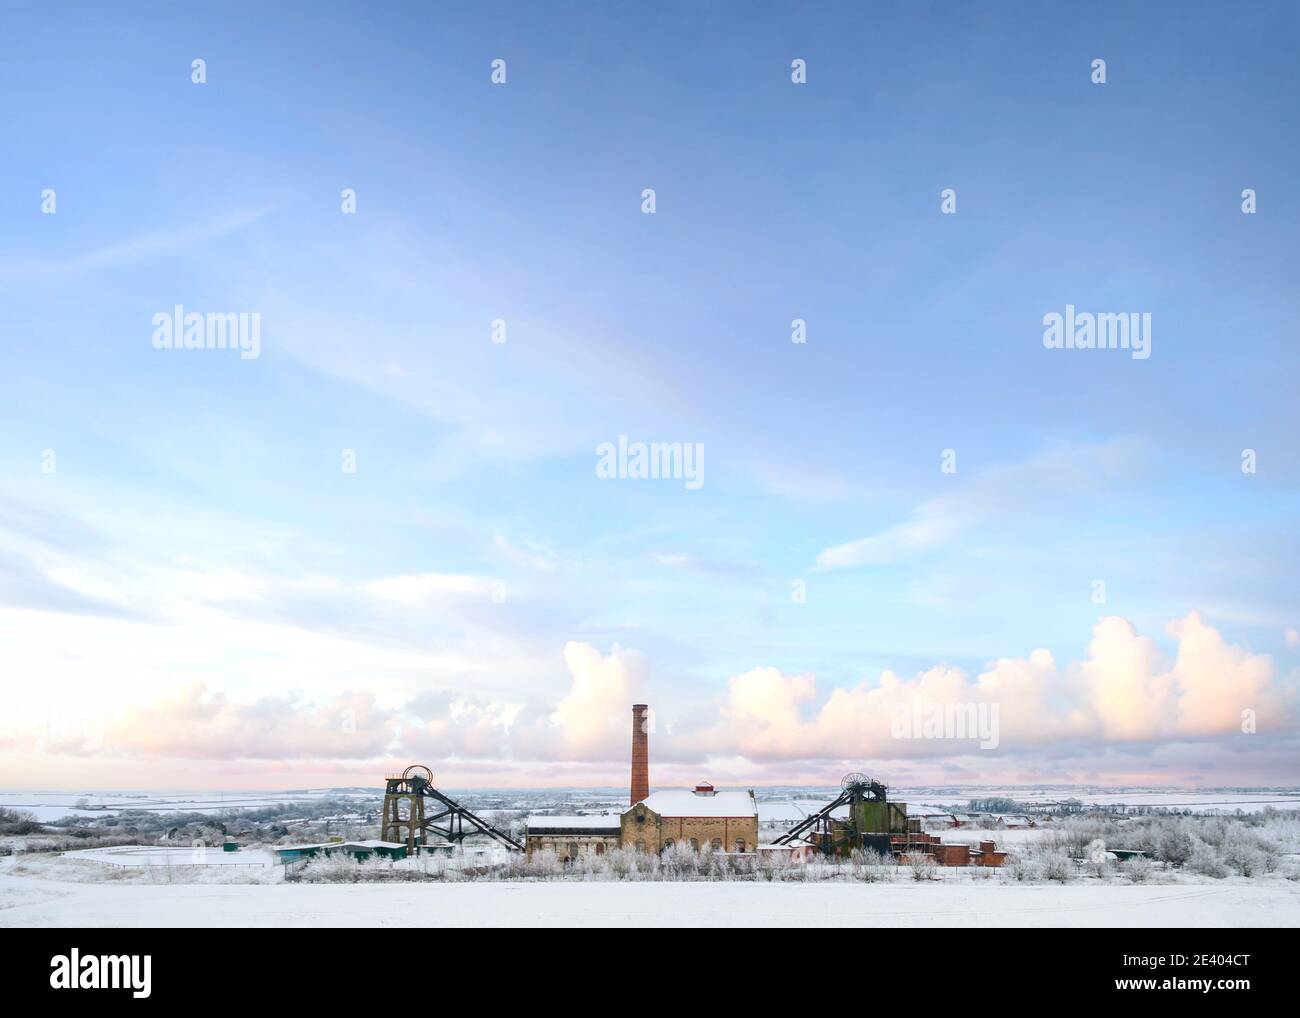 Old abandoned national coal board mine in countryside with industry engine house winding wheel snowfall Christmas winter snow scene landscape Pleasley Stock Photo